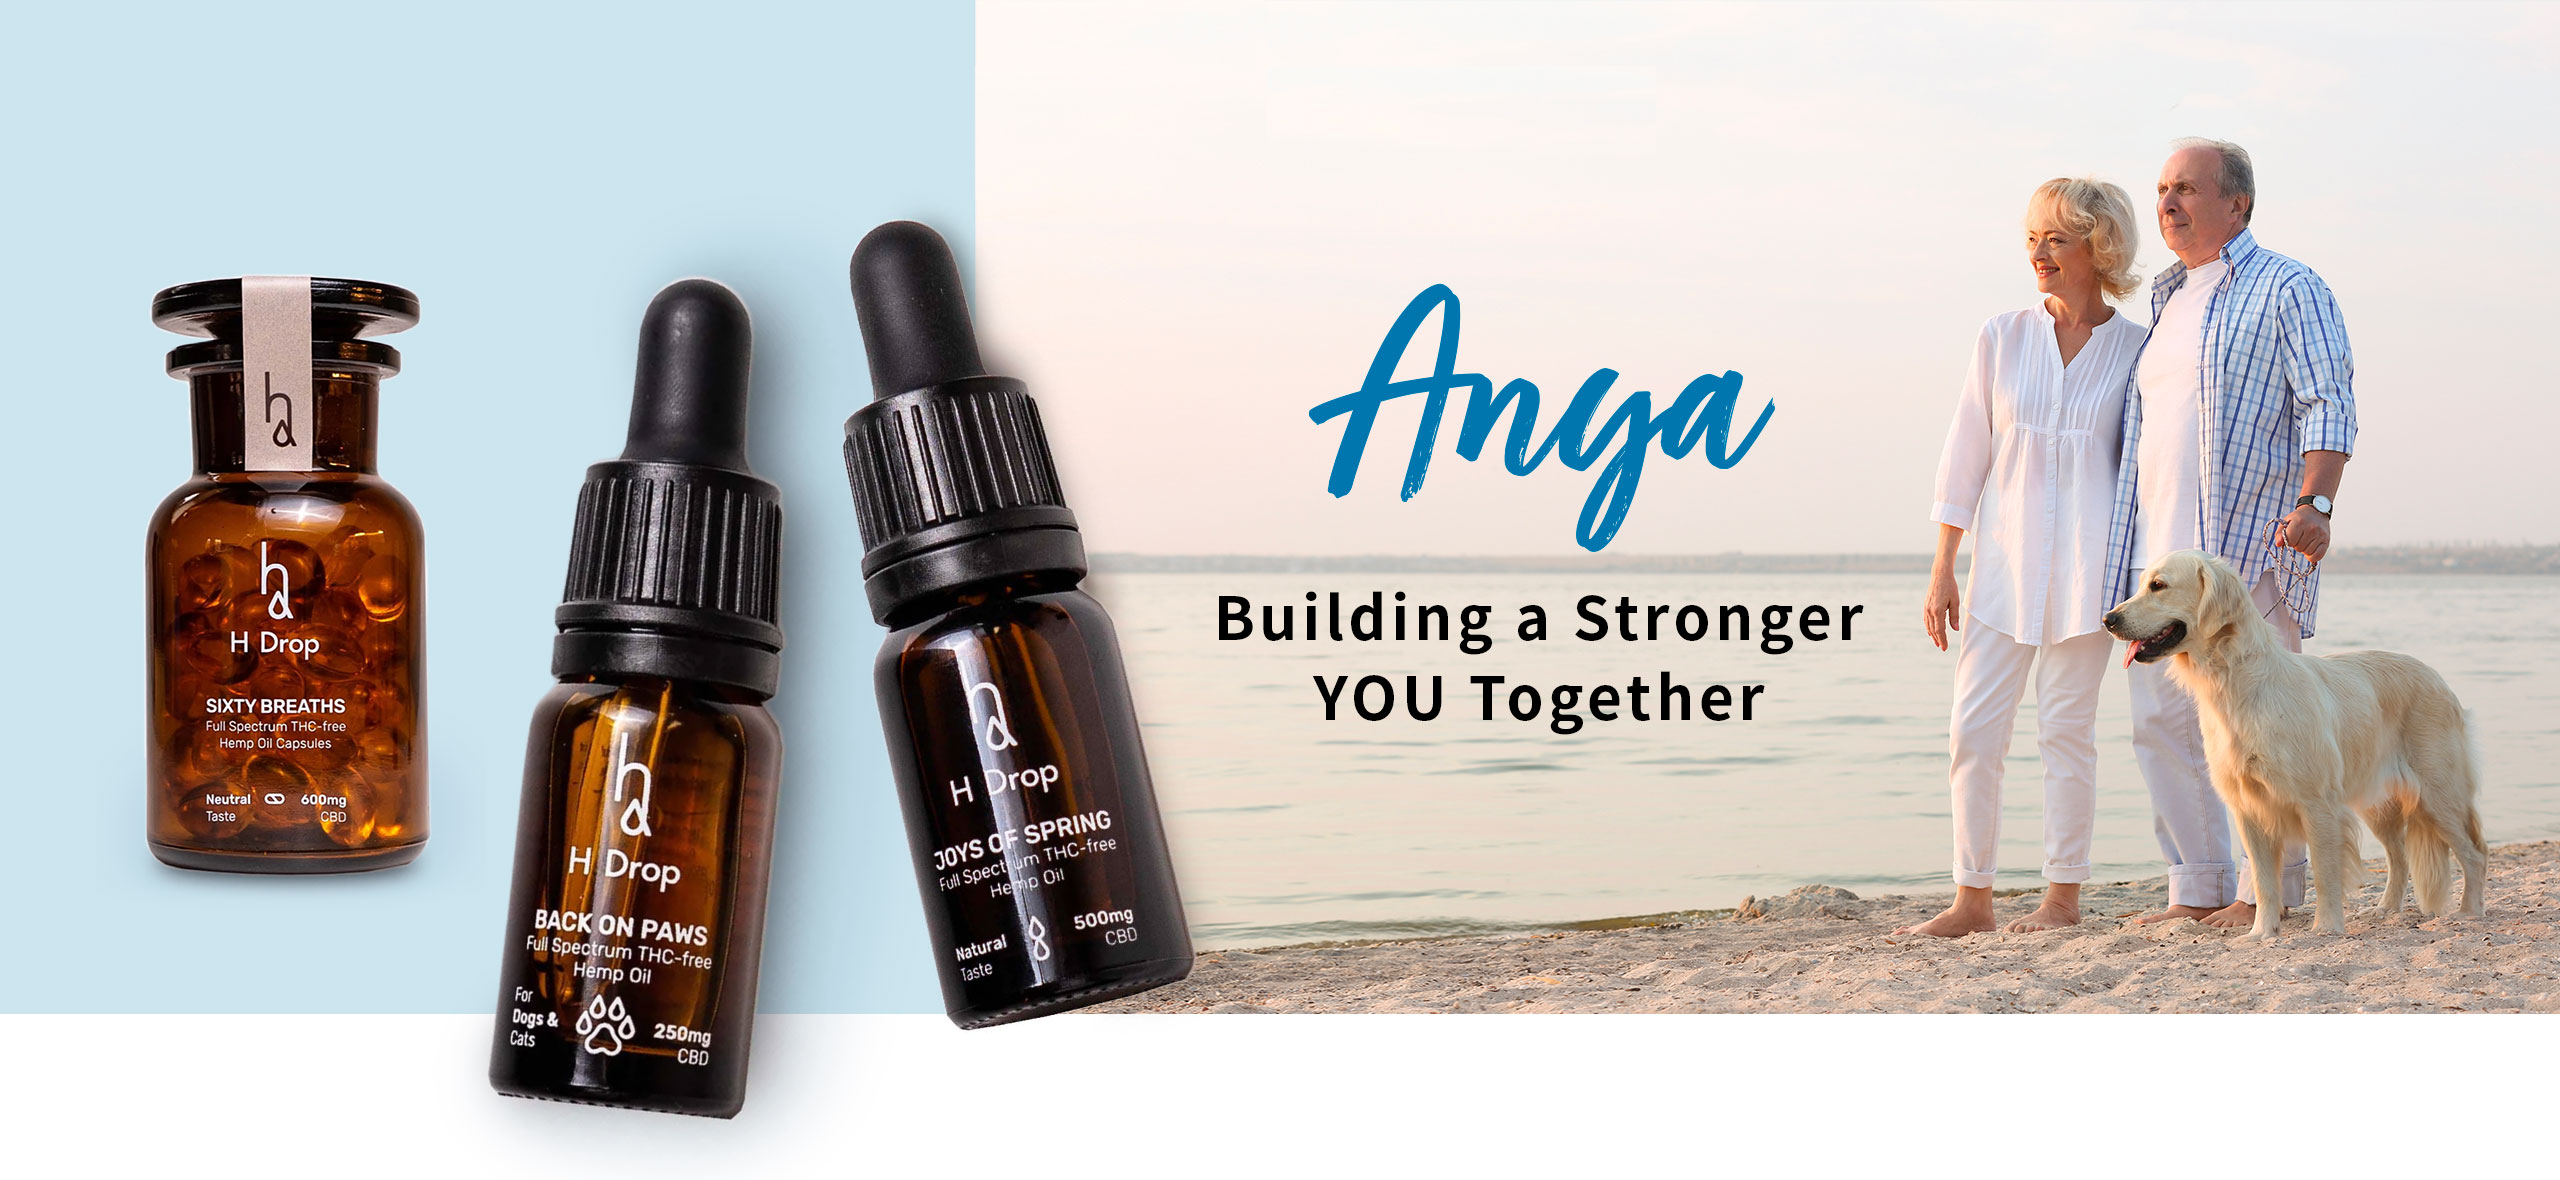 Anya Building a Stronger YOU Together